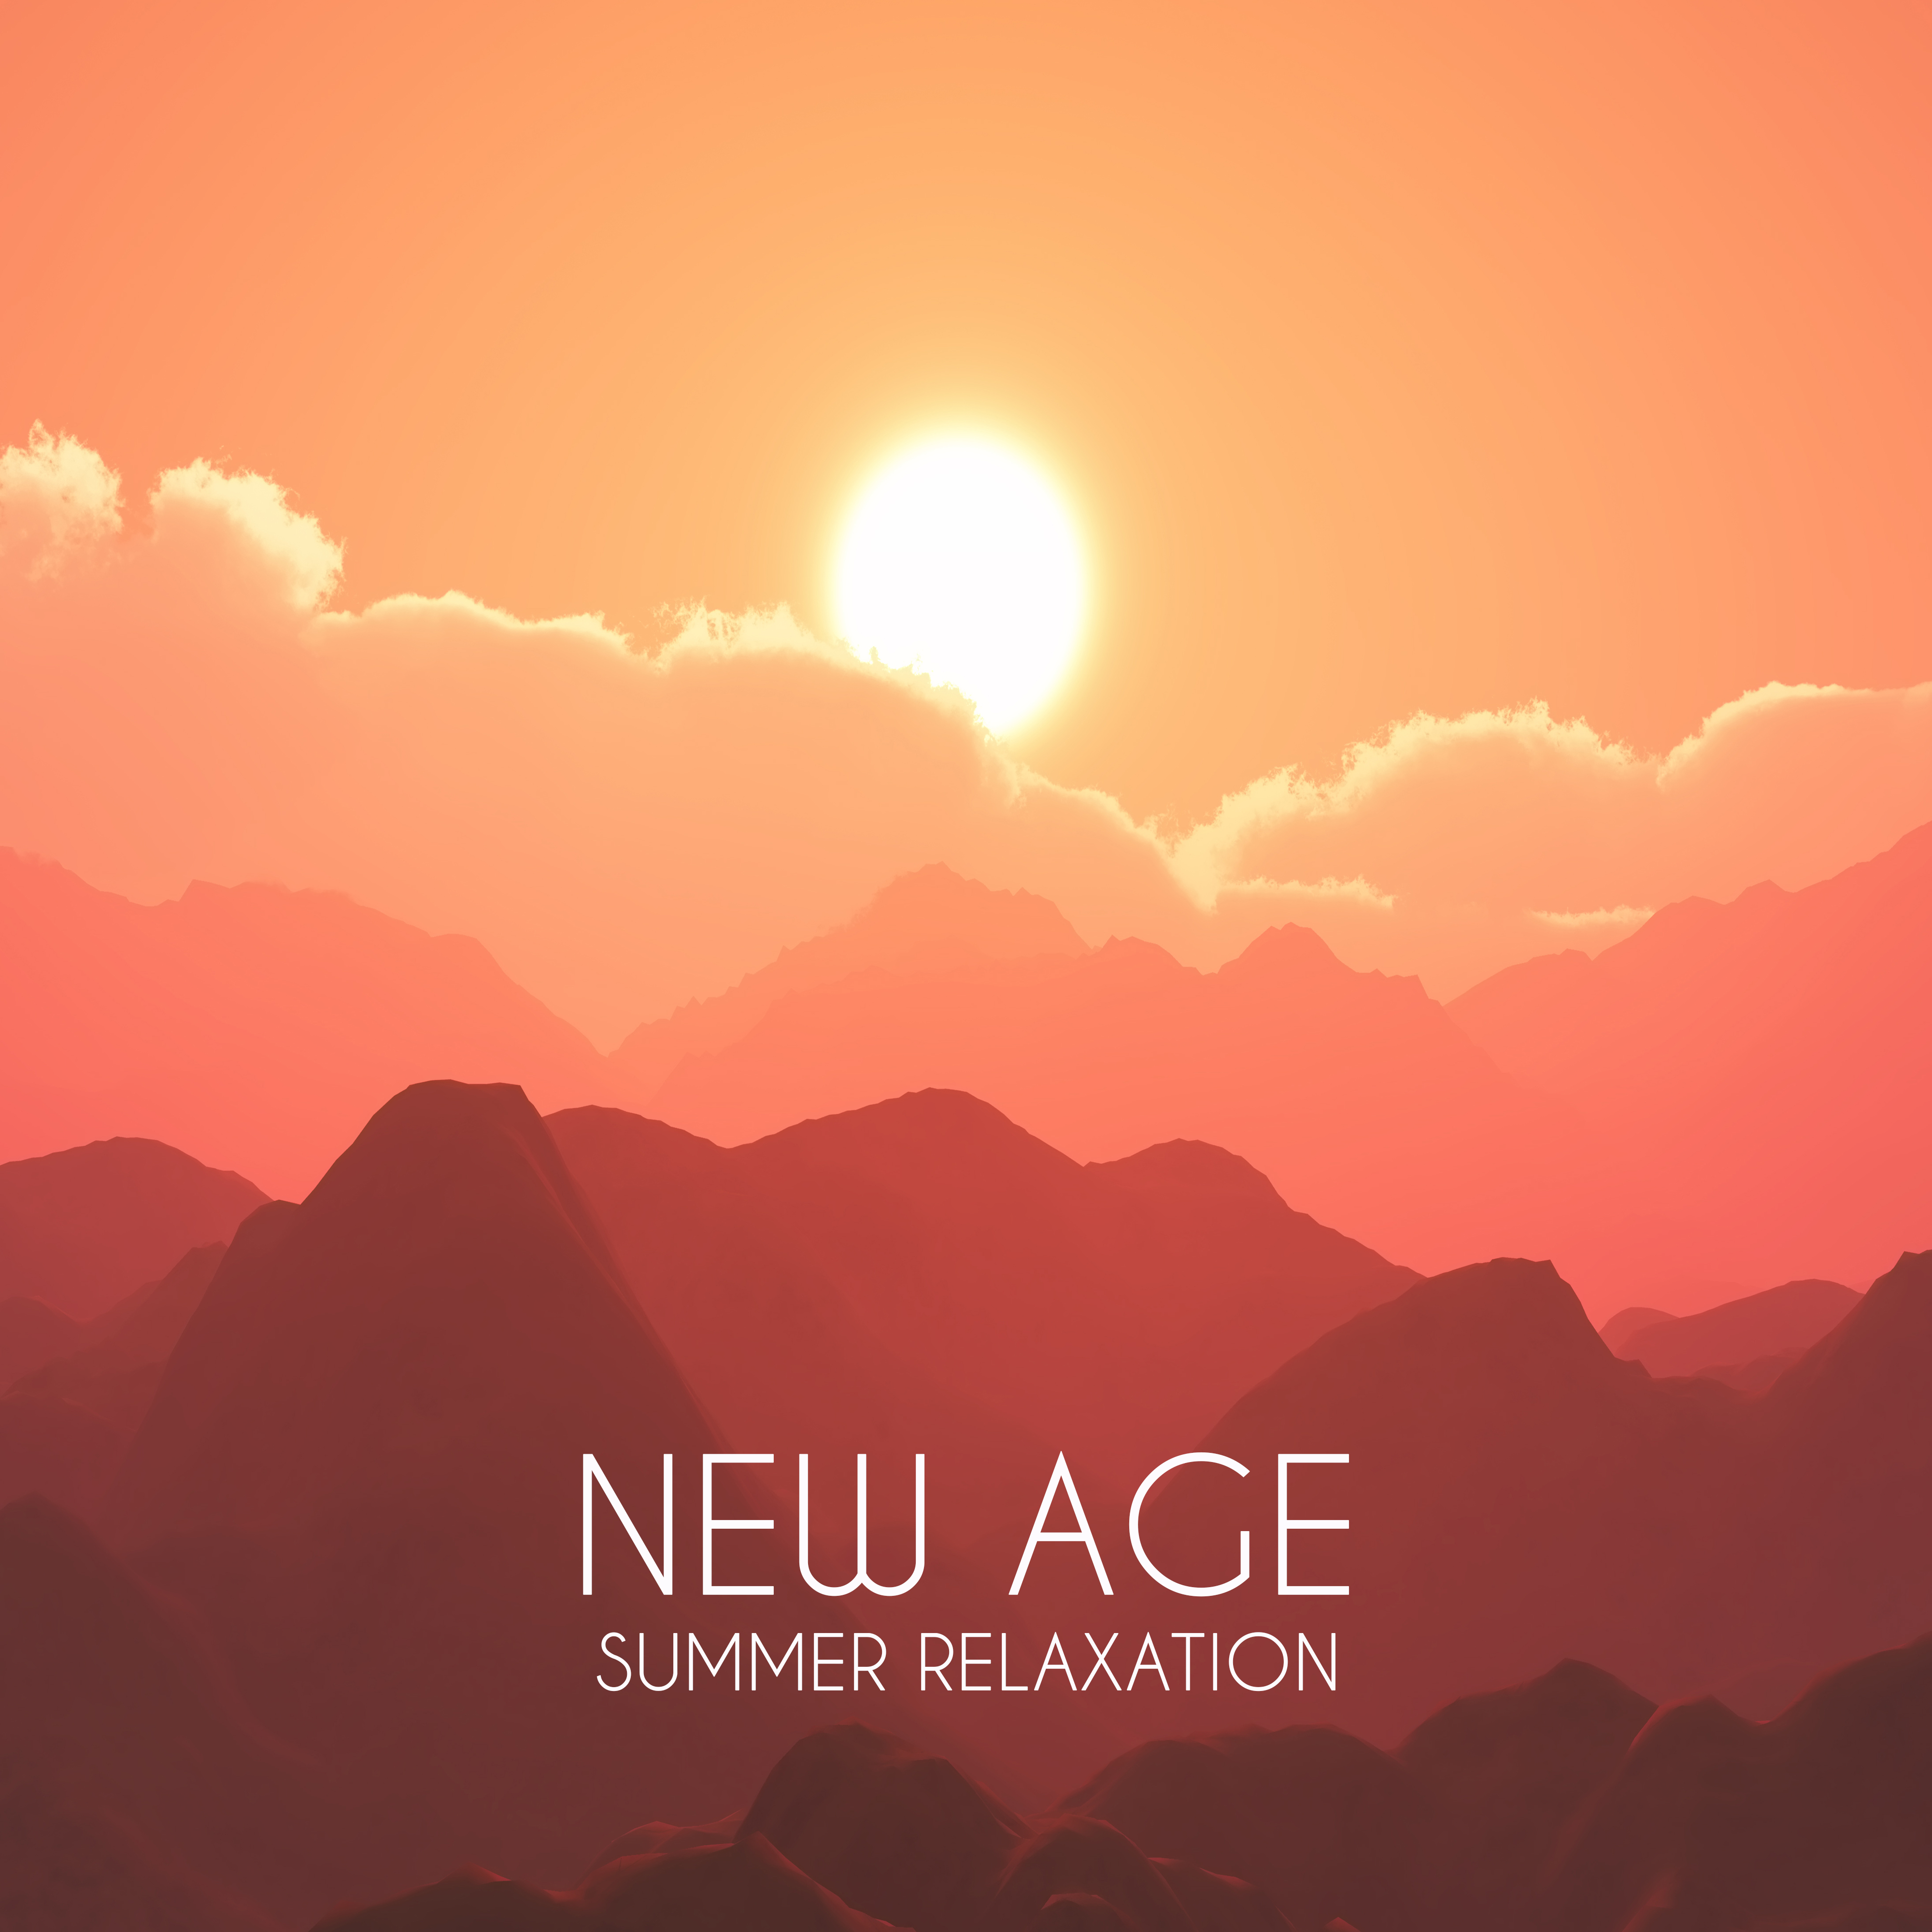 New Age Summer Relaxation